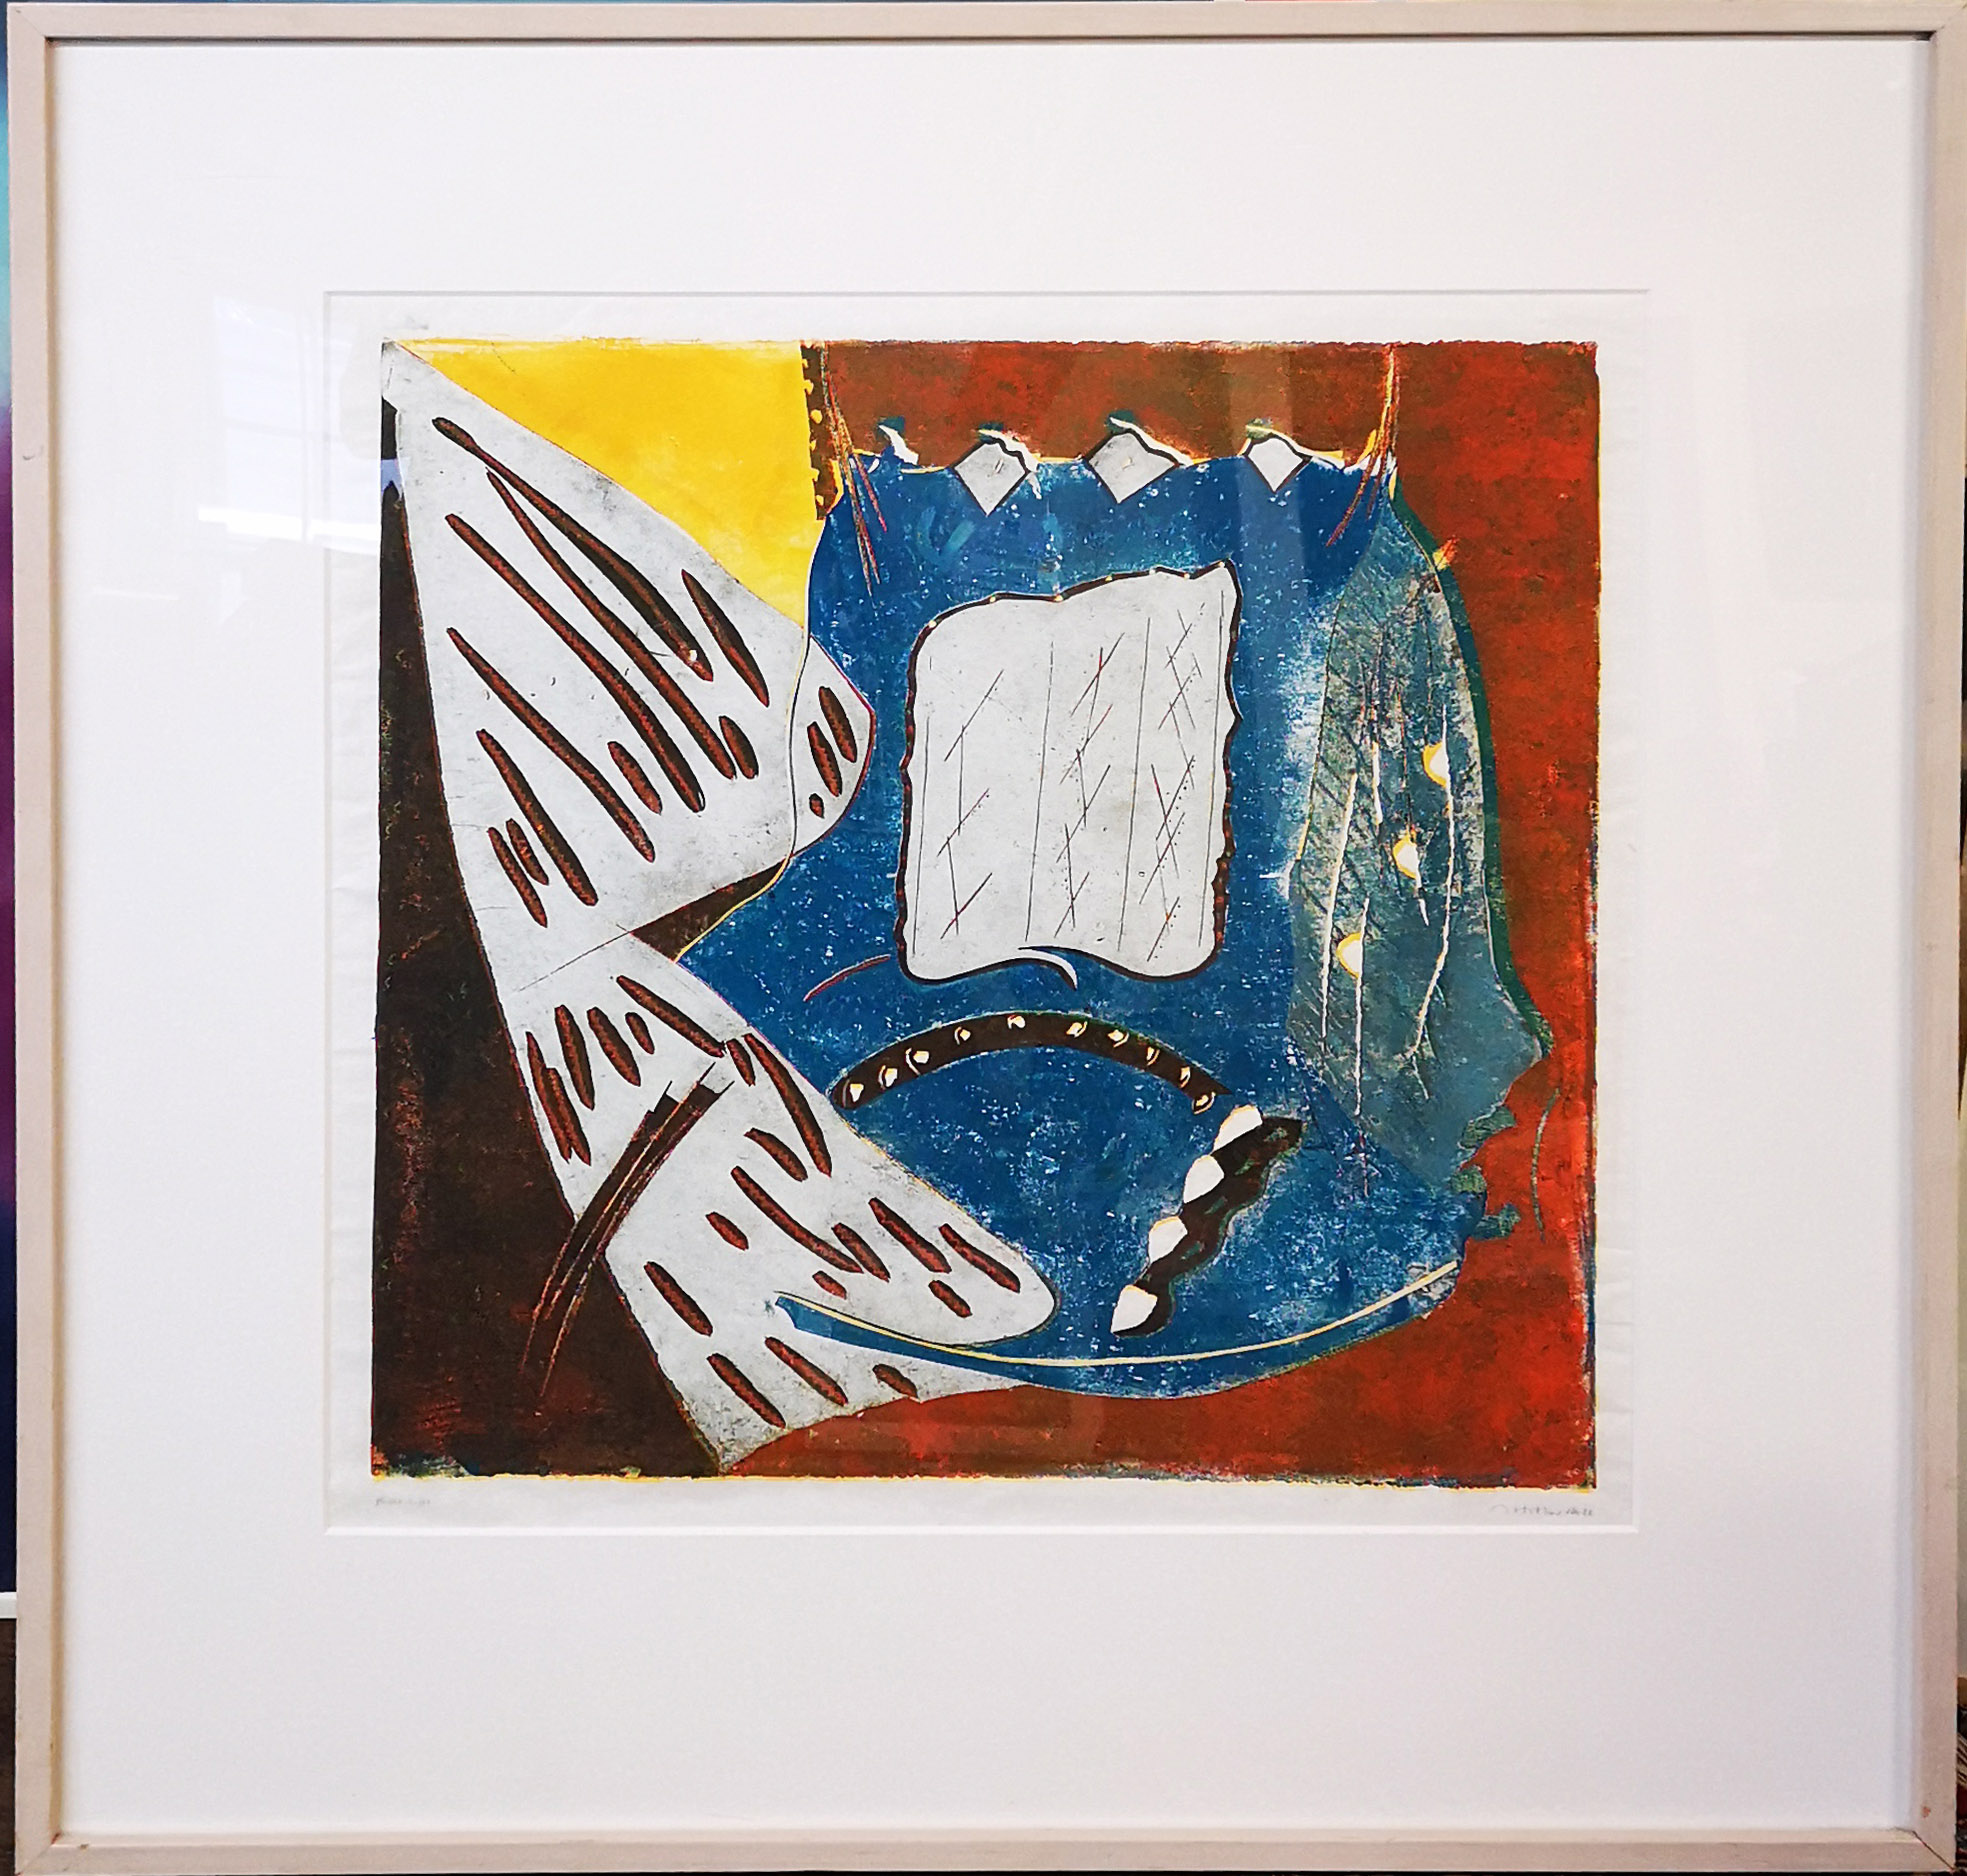 MATHEW HILTON, B. 1948, LITHOGRAPH ABSTRACT PRINT Titled 'Block', limited edition 21/88, signed in - Image 2 of 4